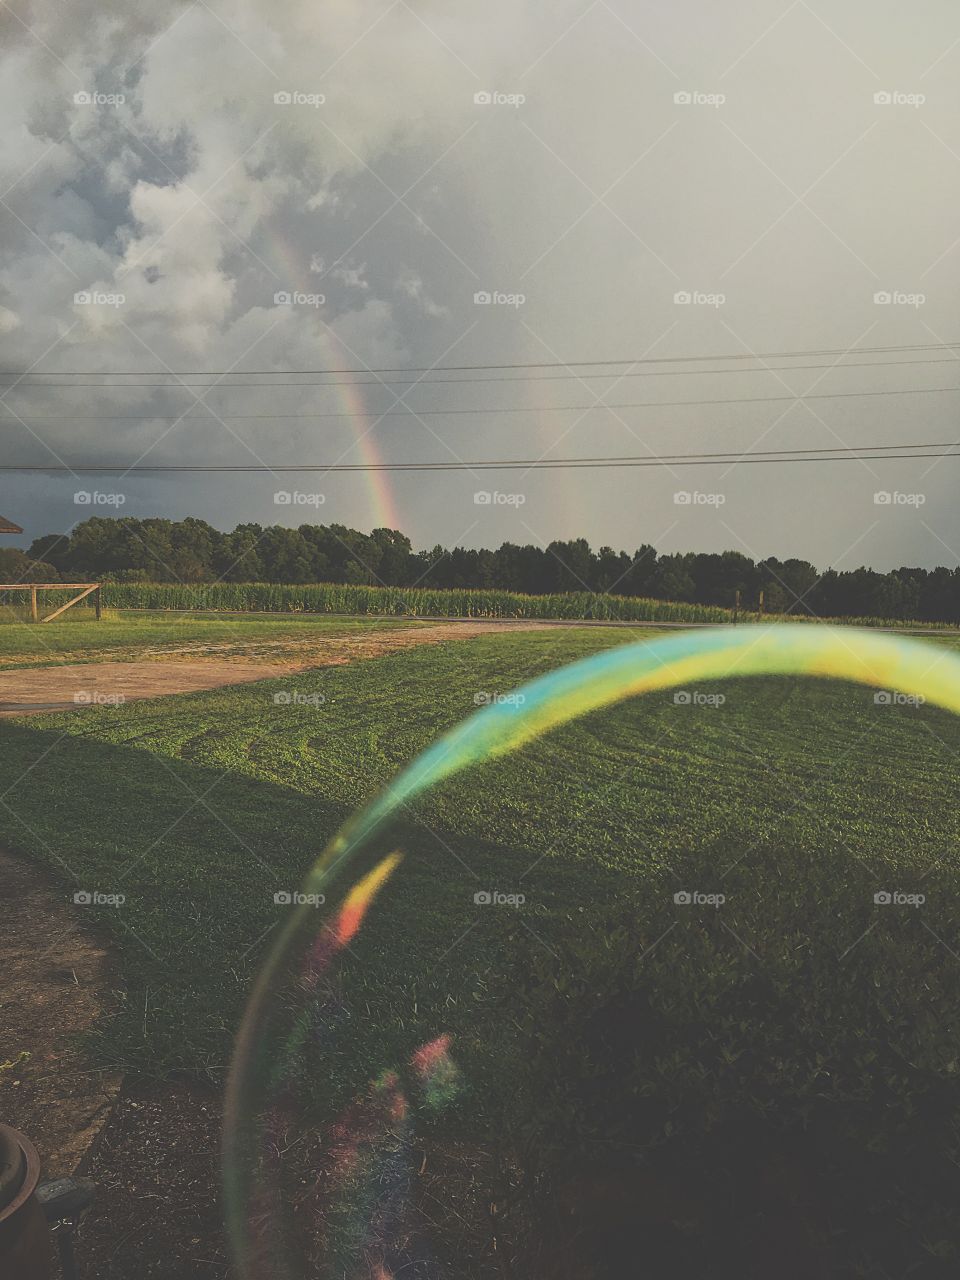 A brightly colored bubble in front of a beautiful green rural landscape with a double rainbow against a stormy sky.